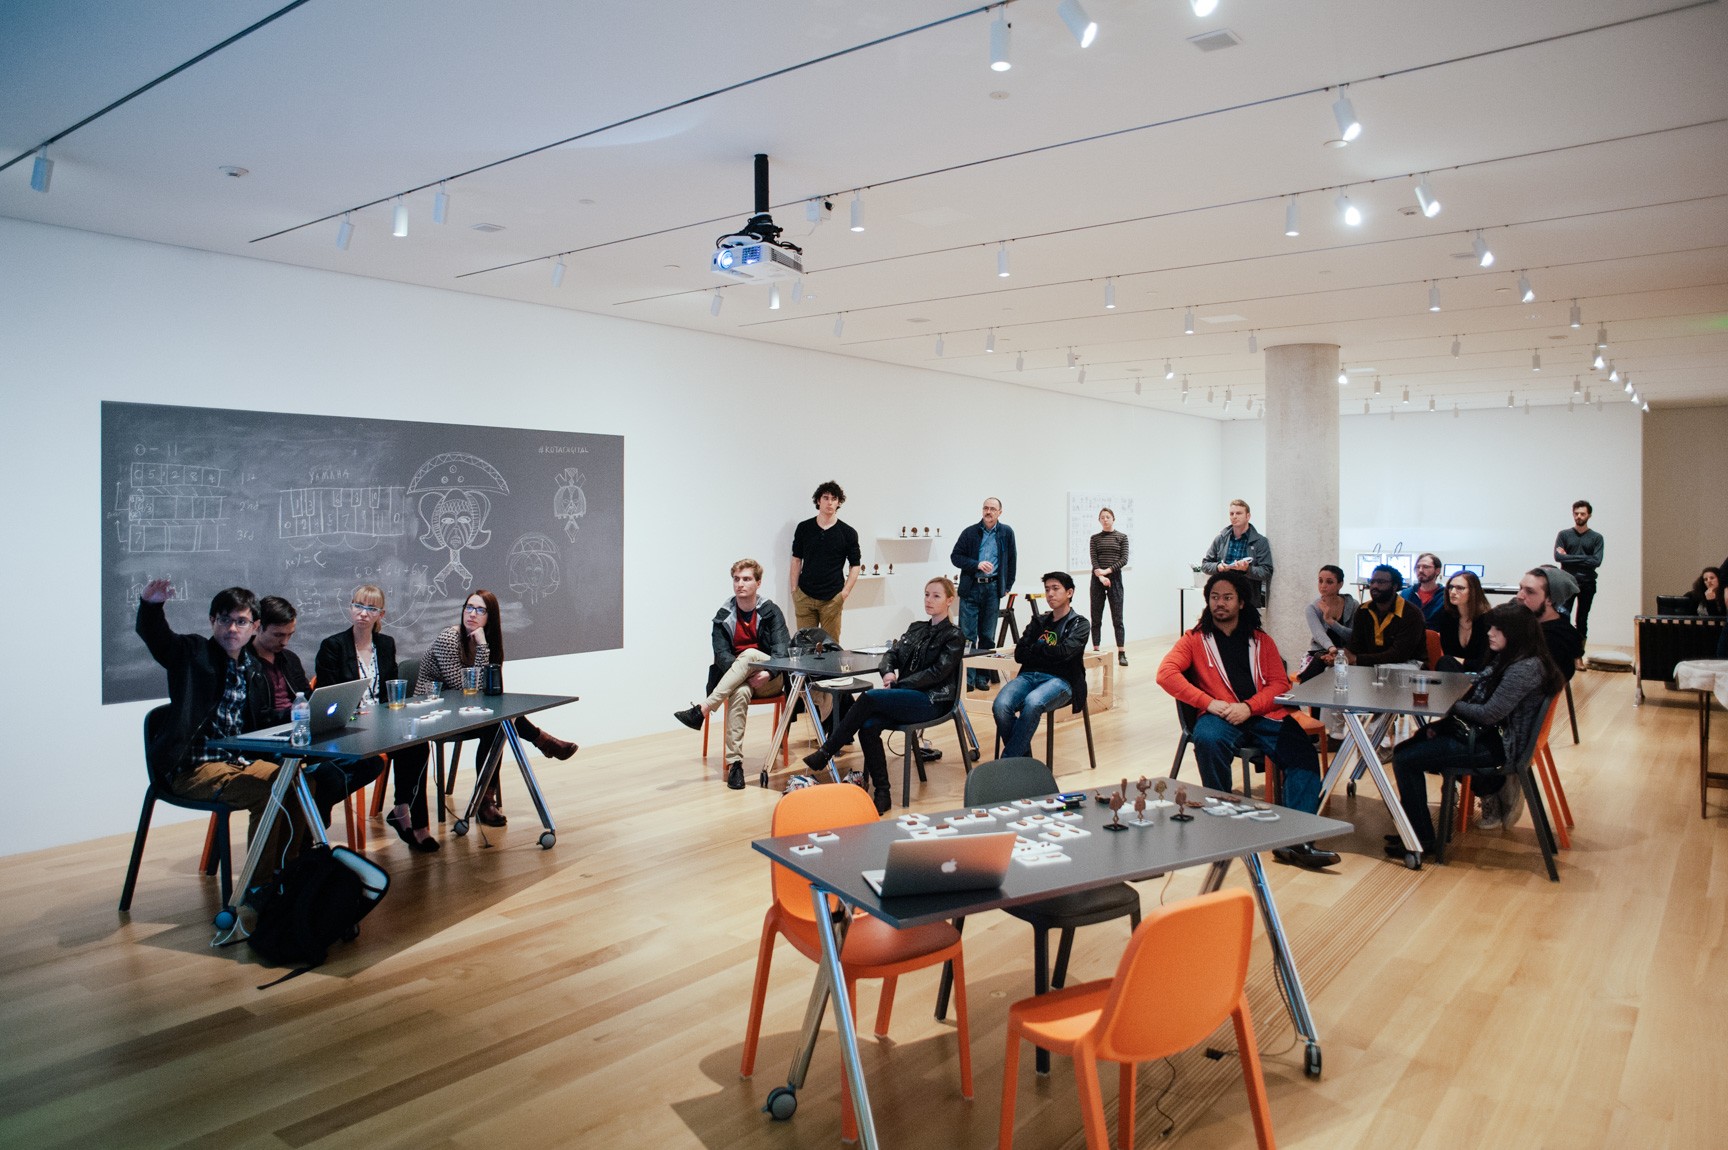 Collaborators attend a presentation in the Lower-West Gallery for a 3-D printing workshop.